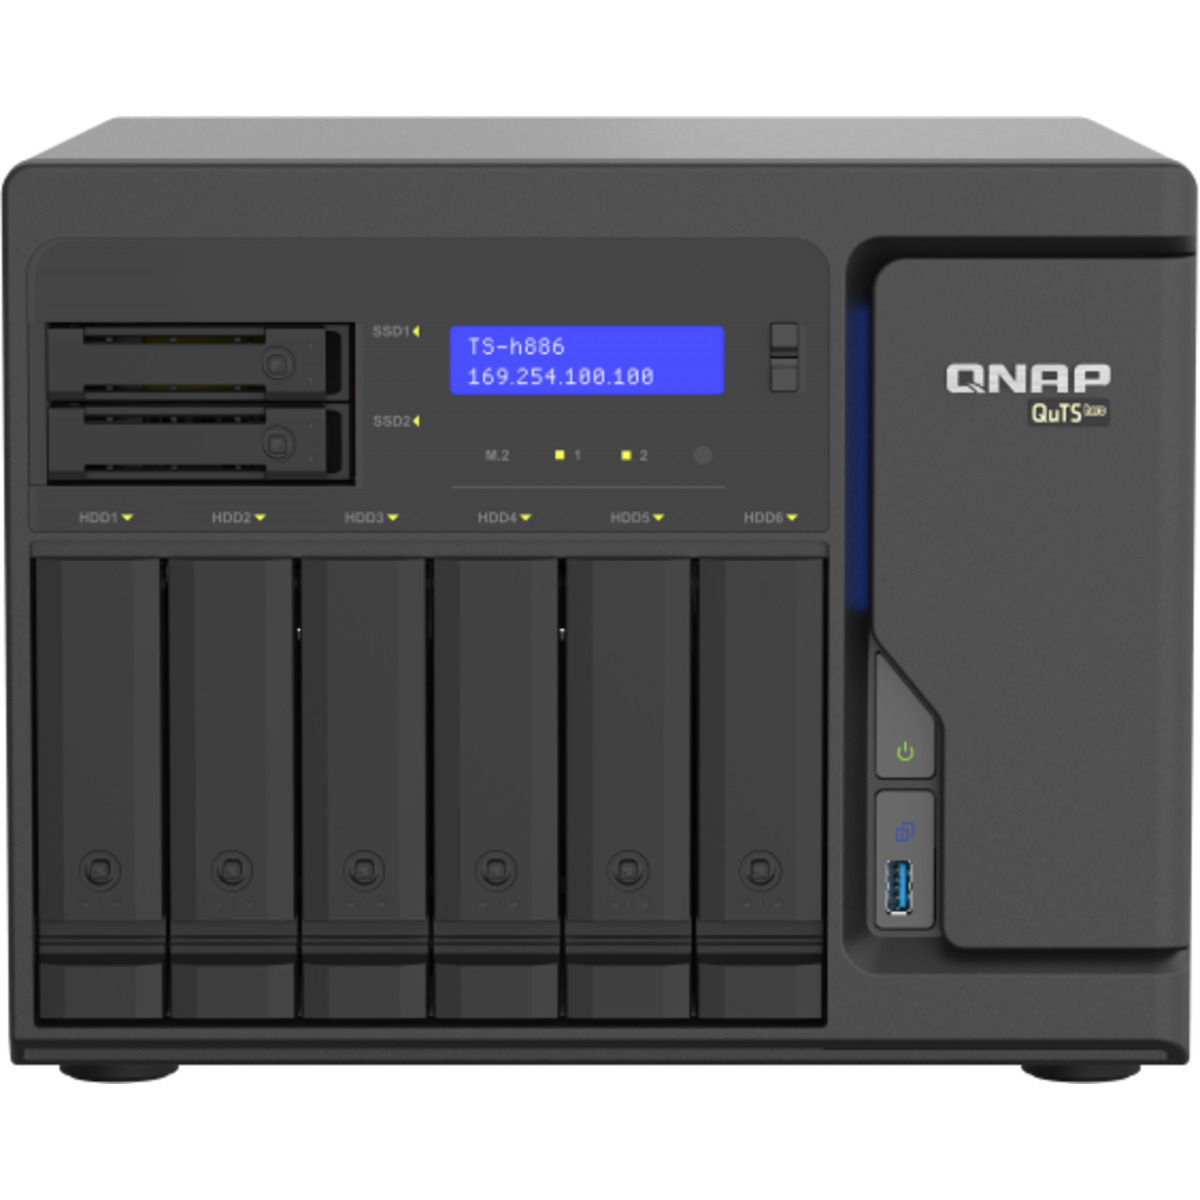 QNAP TS-h886 QuTS hero NAS 24tb 6+2-Bay Desktop Large Business / Enterprise NAS - Network Attached Storage Device 3x8tb TeamGroup EX2 Elite T253E2008T0C101 2.5 550/520MB/s SATA 6Gb/s SSD CONSUMER Class Drives Installed - Burn-In Tested TS-h886 QuTS hero NAS